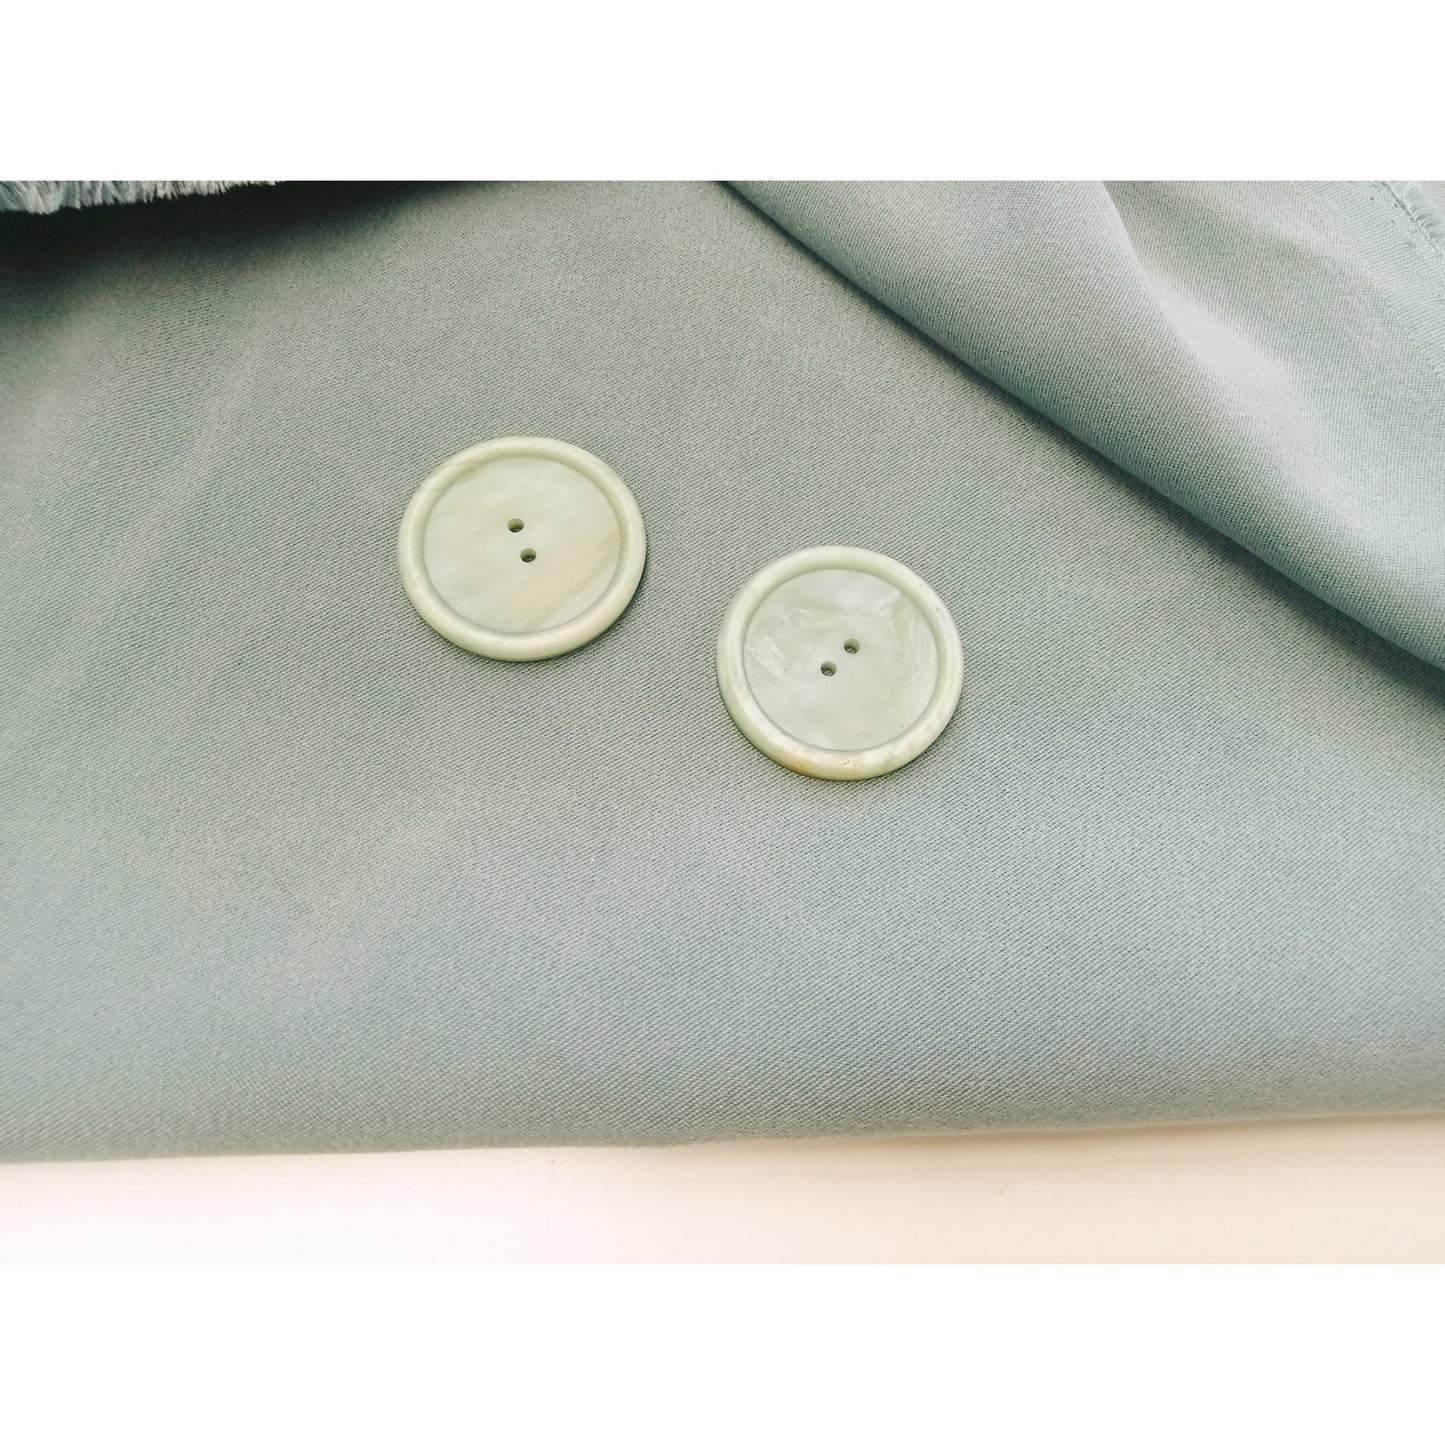 3.5cm sage resin buttons -2